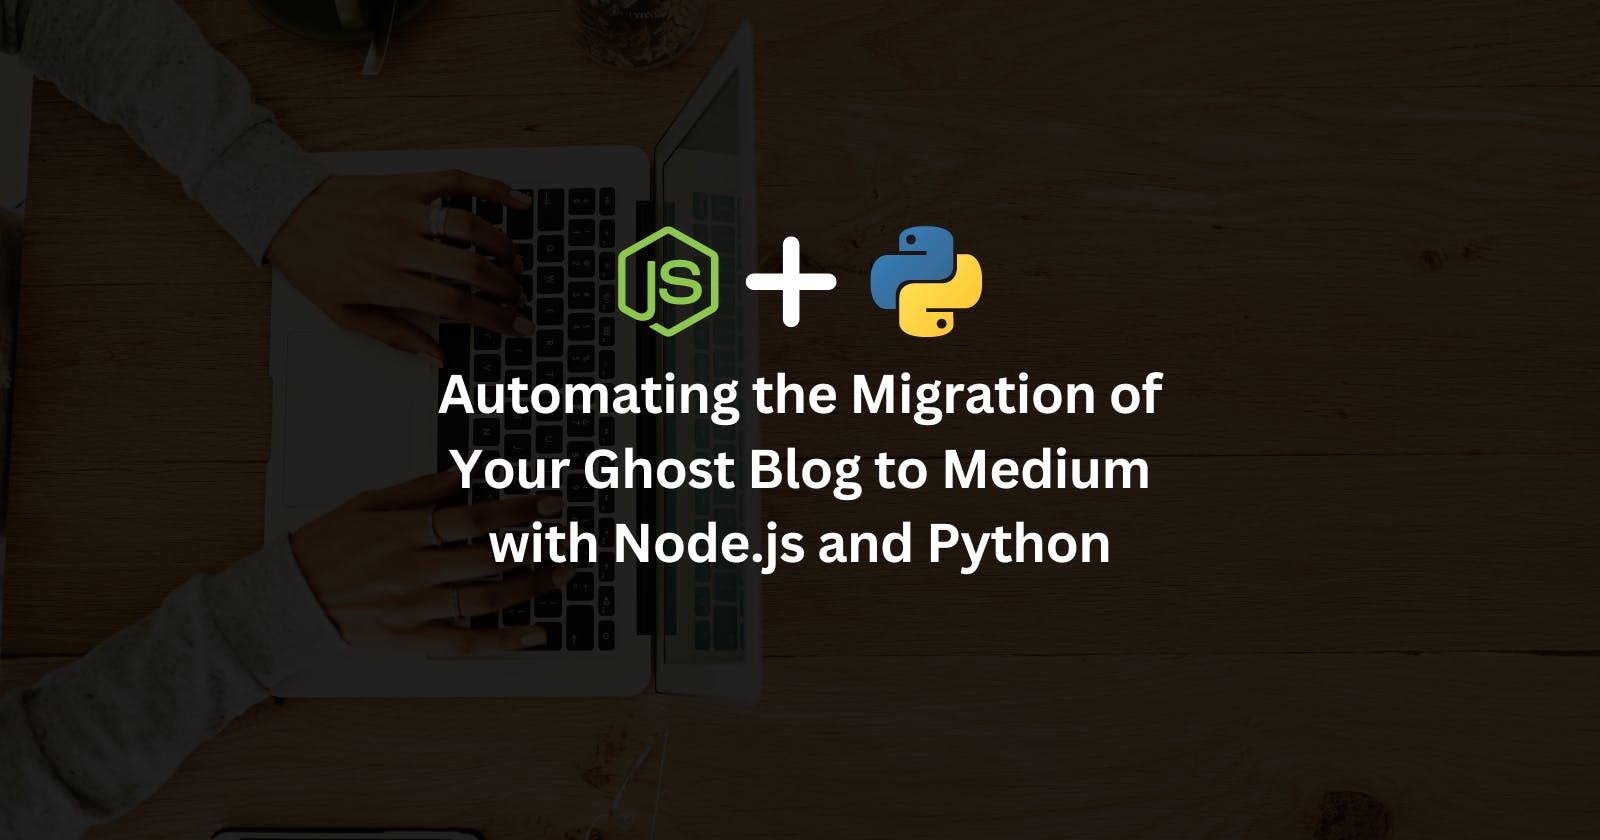 Automating the Migration of Your Ghost Publication to Medium with Node.js and Python